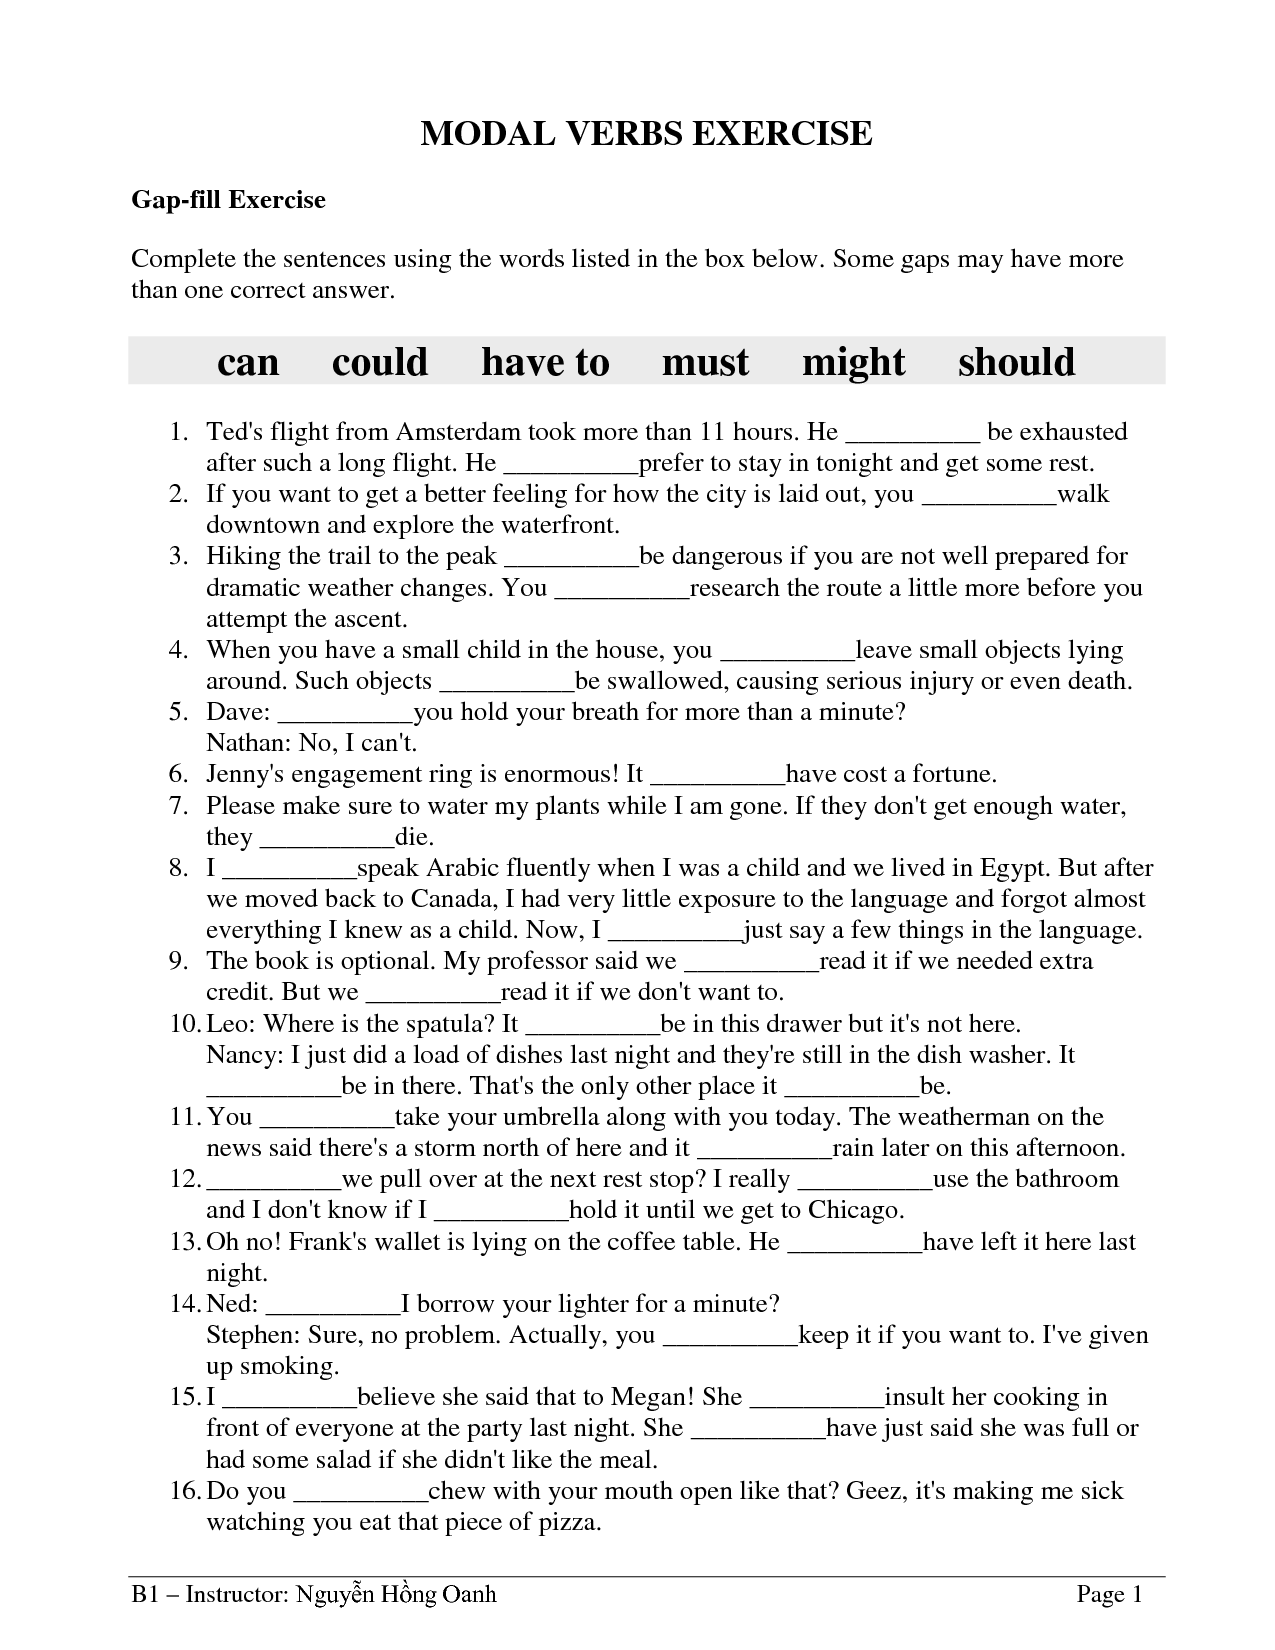 modal-verbs-worksheets-for-grade-worksheets-sexiezpicz-web-porn